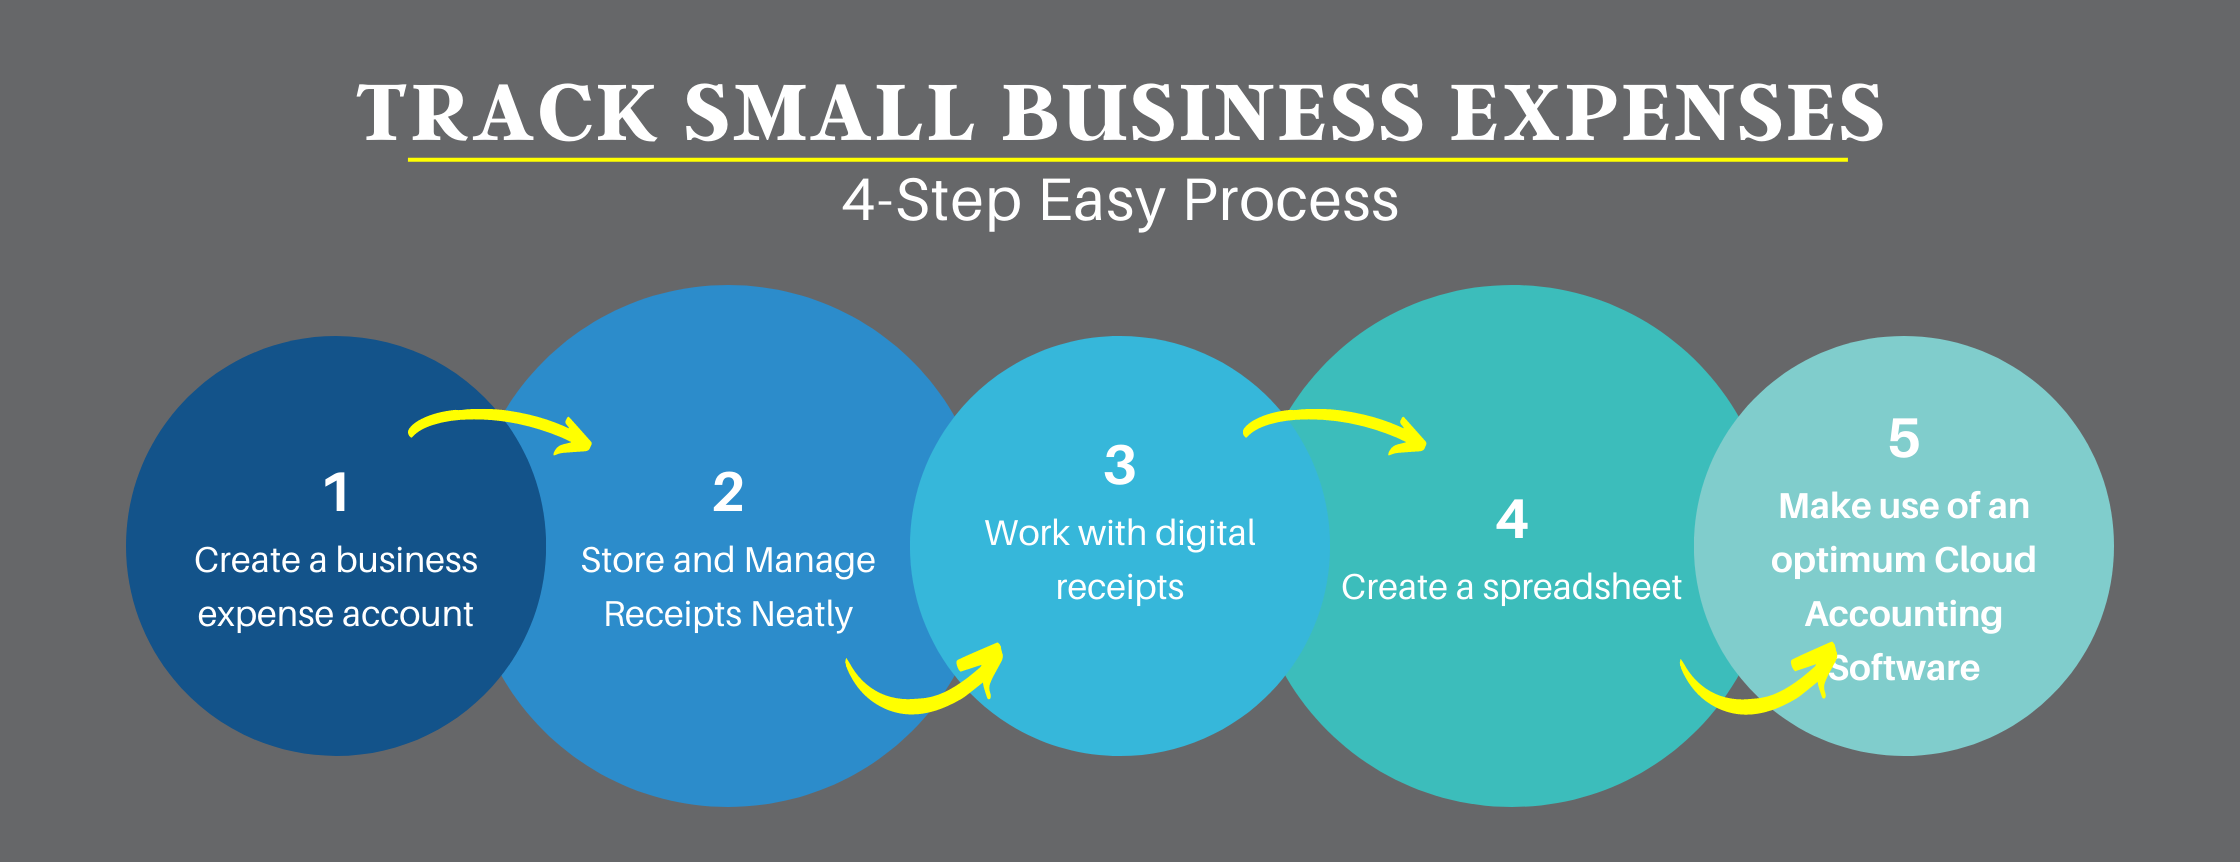 4 Steps To Track Small Business Expenses